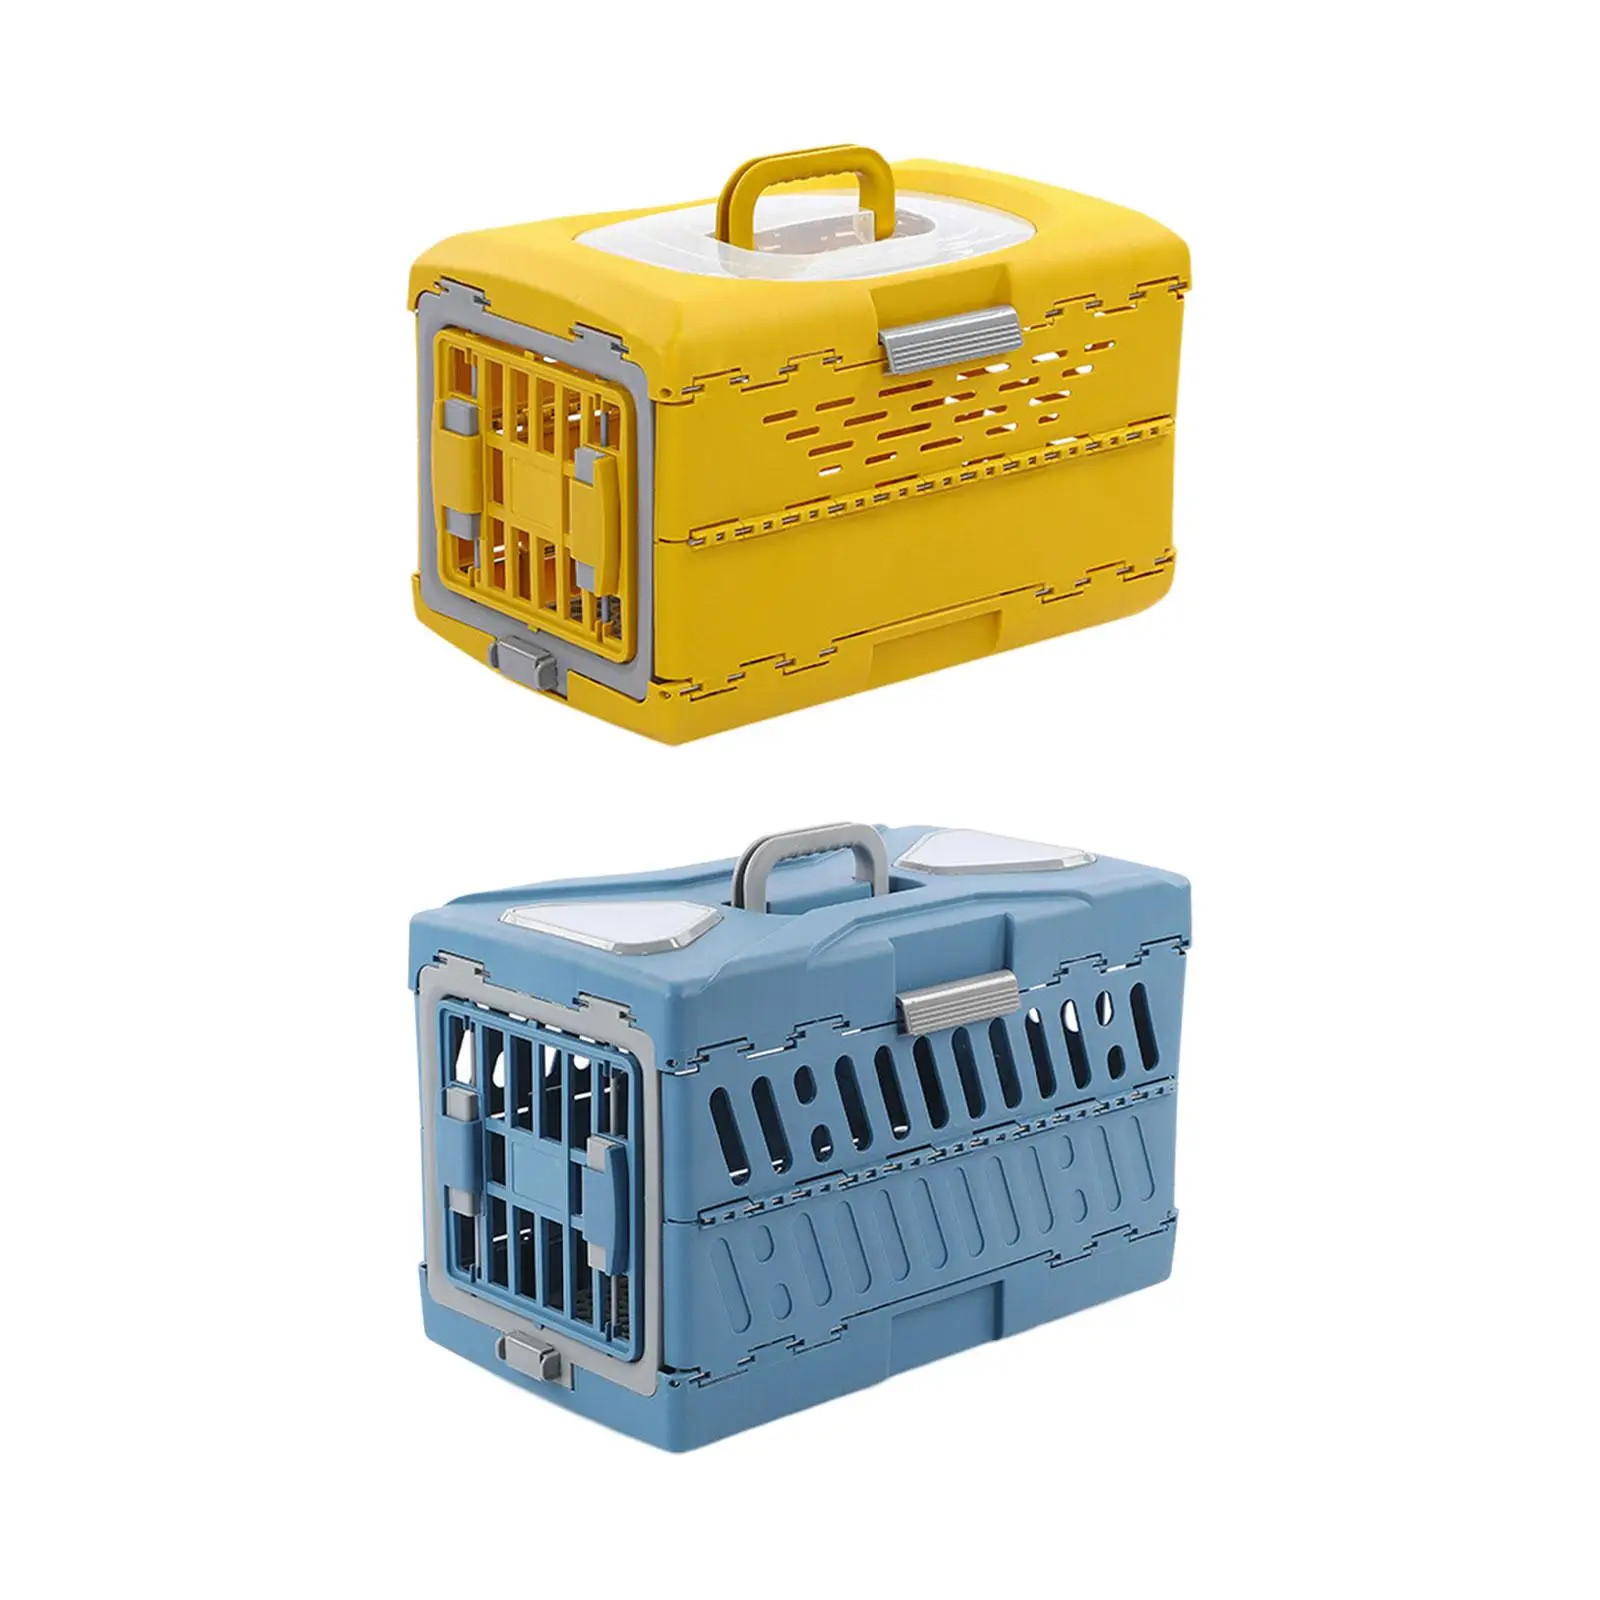 Collapsible Puppy Crate Reusable Folding Breathable Hard Sided Cat Transport Box Pet Carrier for Small Dogs Rabbit Small Animals